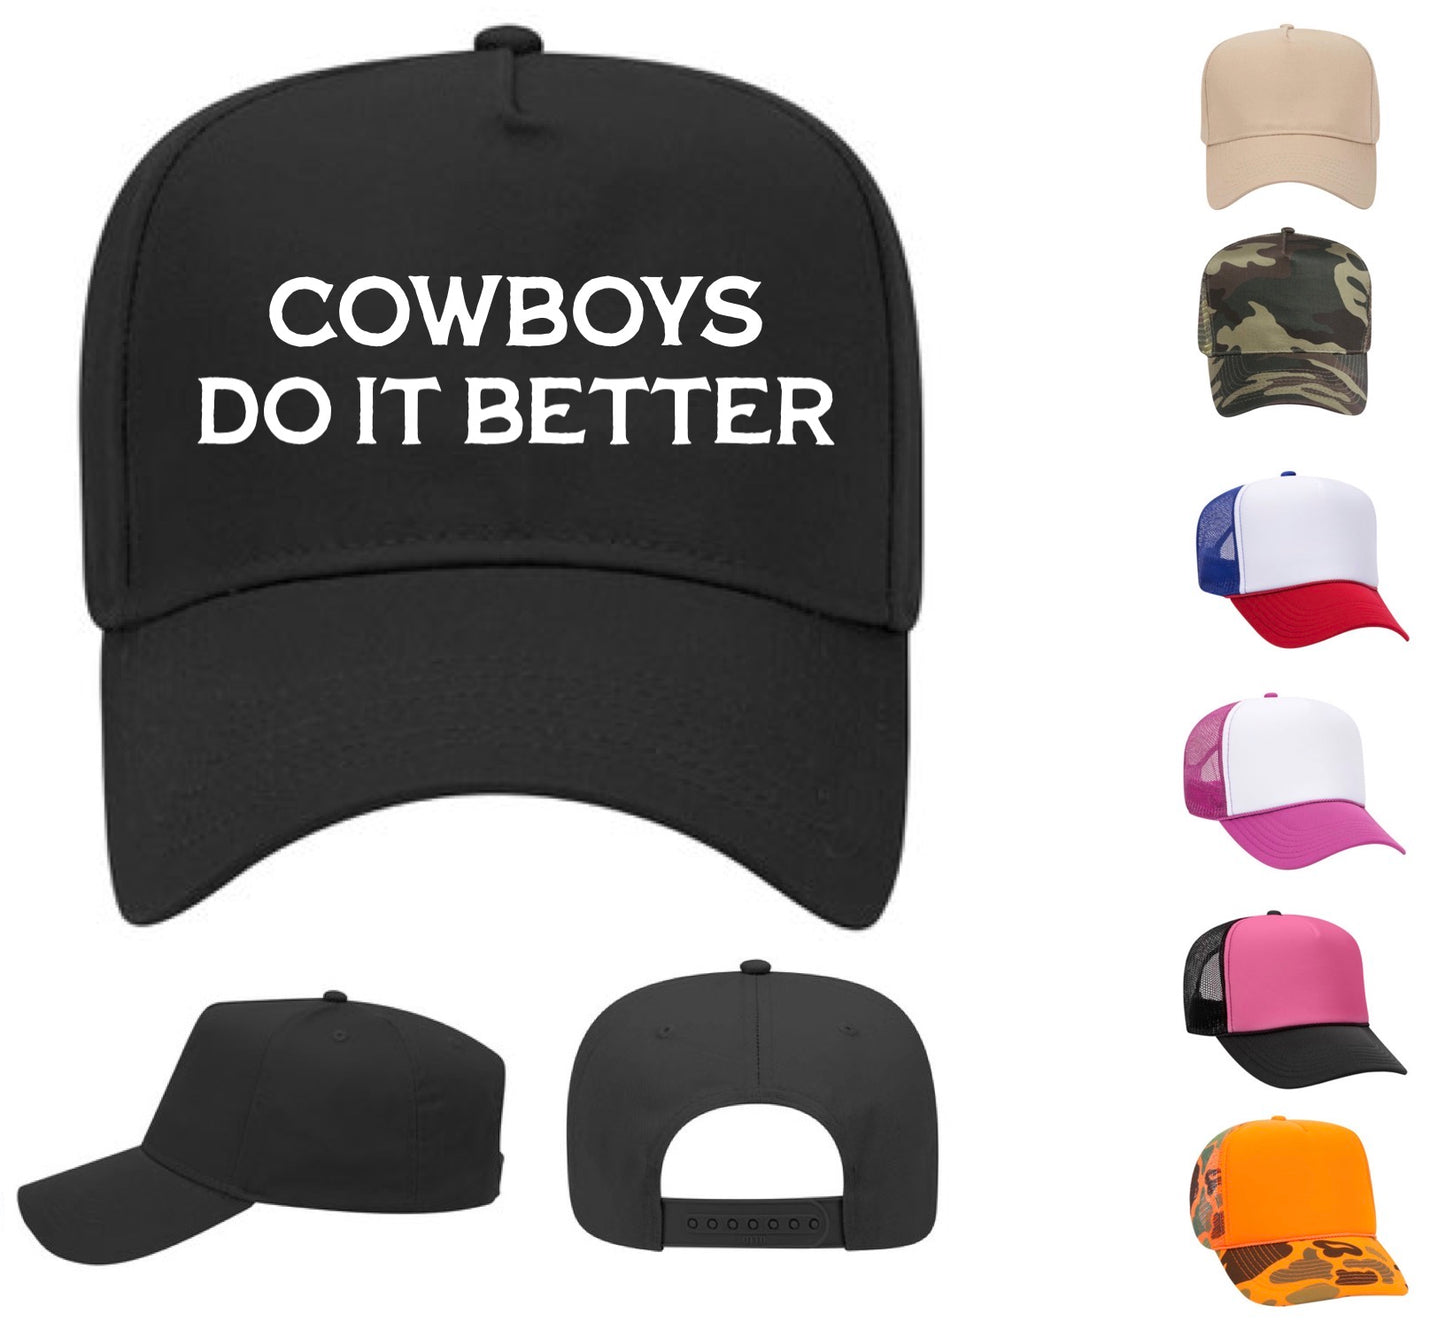 Cowboys Do It Better (FREE Shipping)